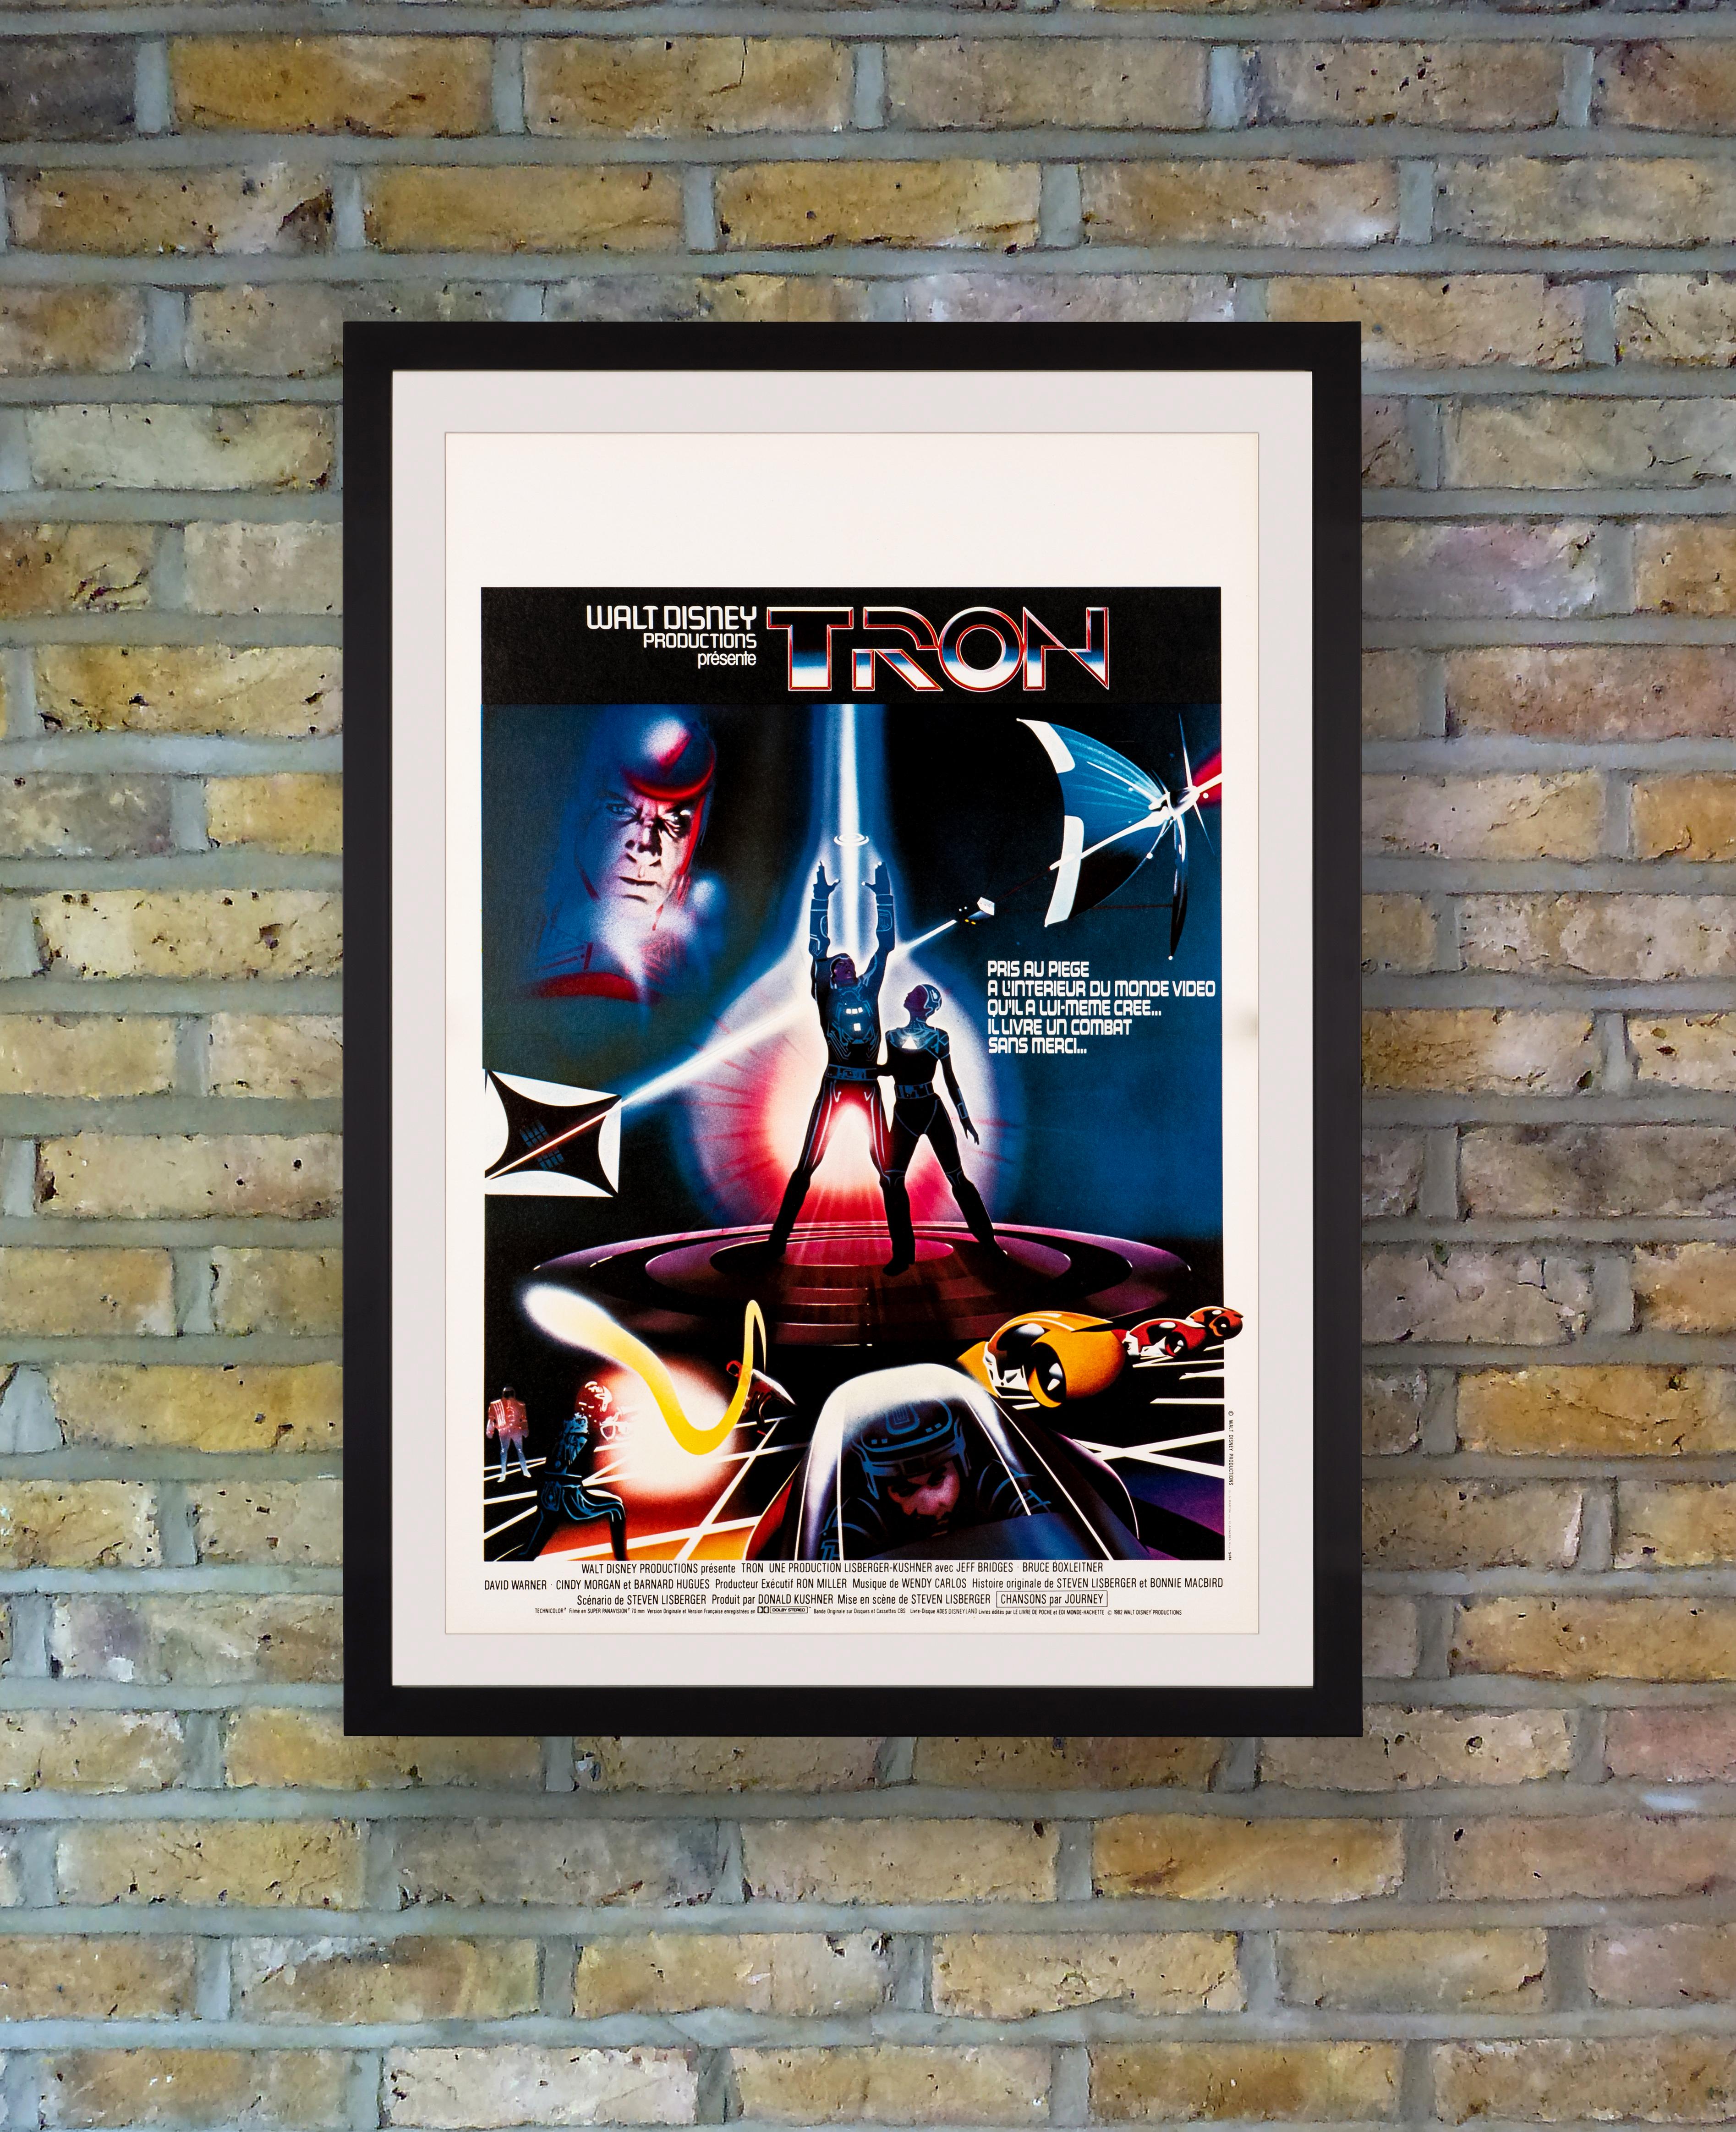 A vibrant French Petite poster for Walt Disney's pioneering 1982 sci-fi adventure 'Tron.' Written and directed by Steven Lisberger, the futuristic film starred Jeff Bridges as a computer programmer who is transported into the virtual world of a